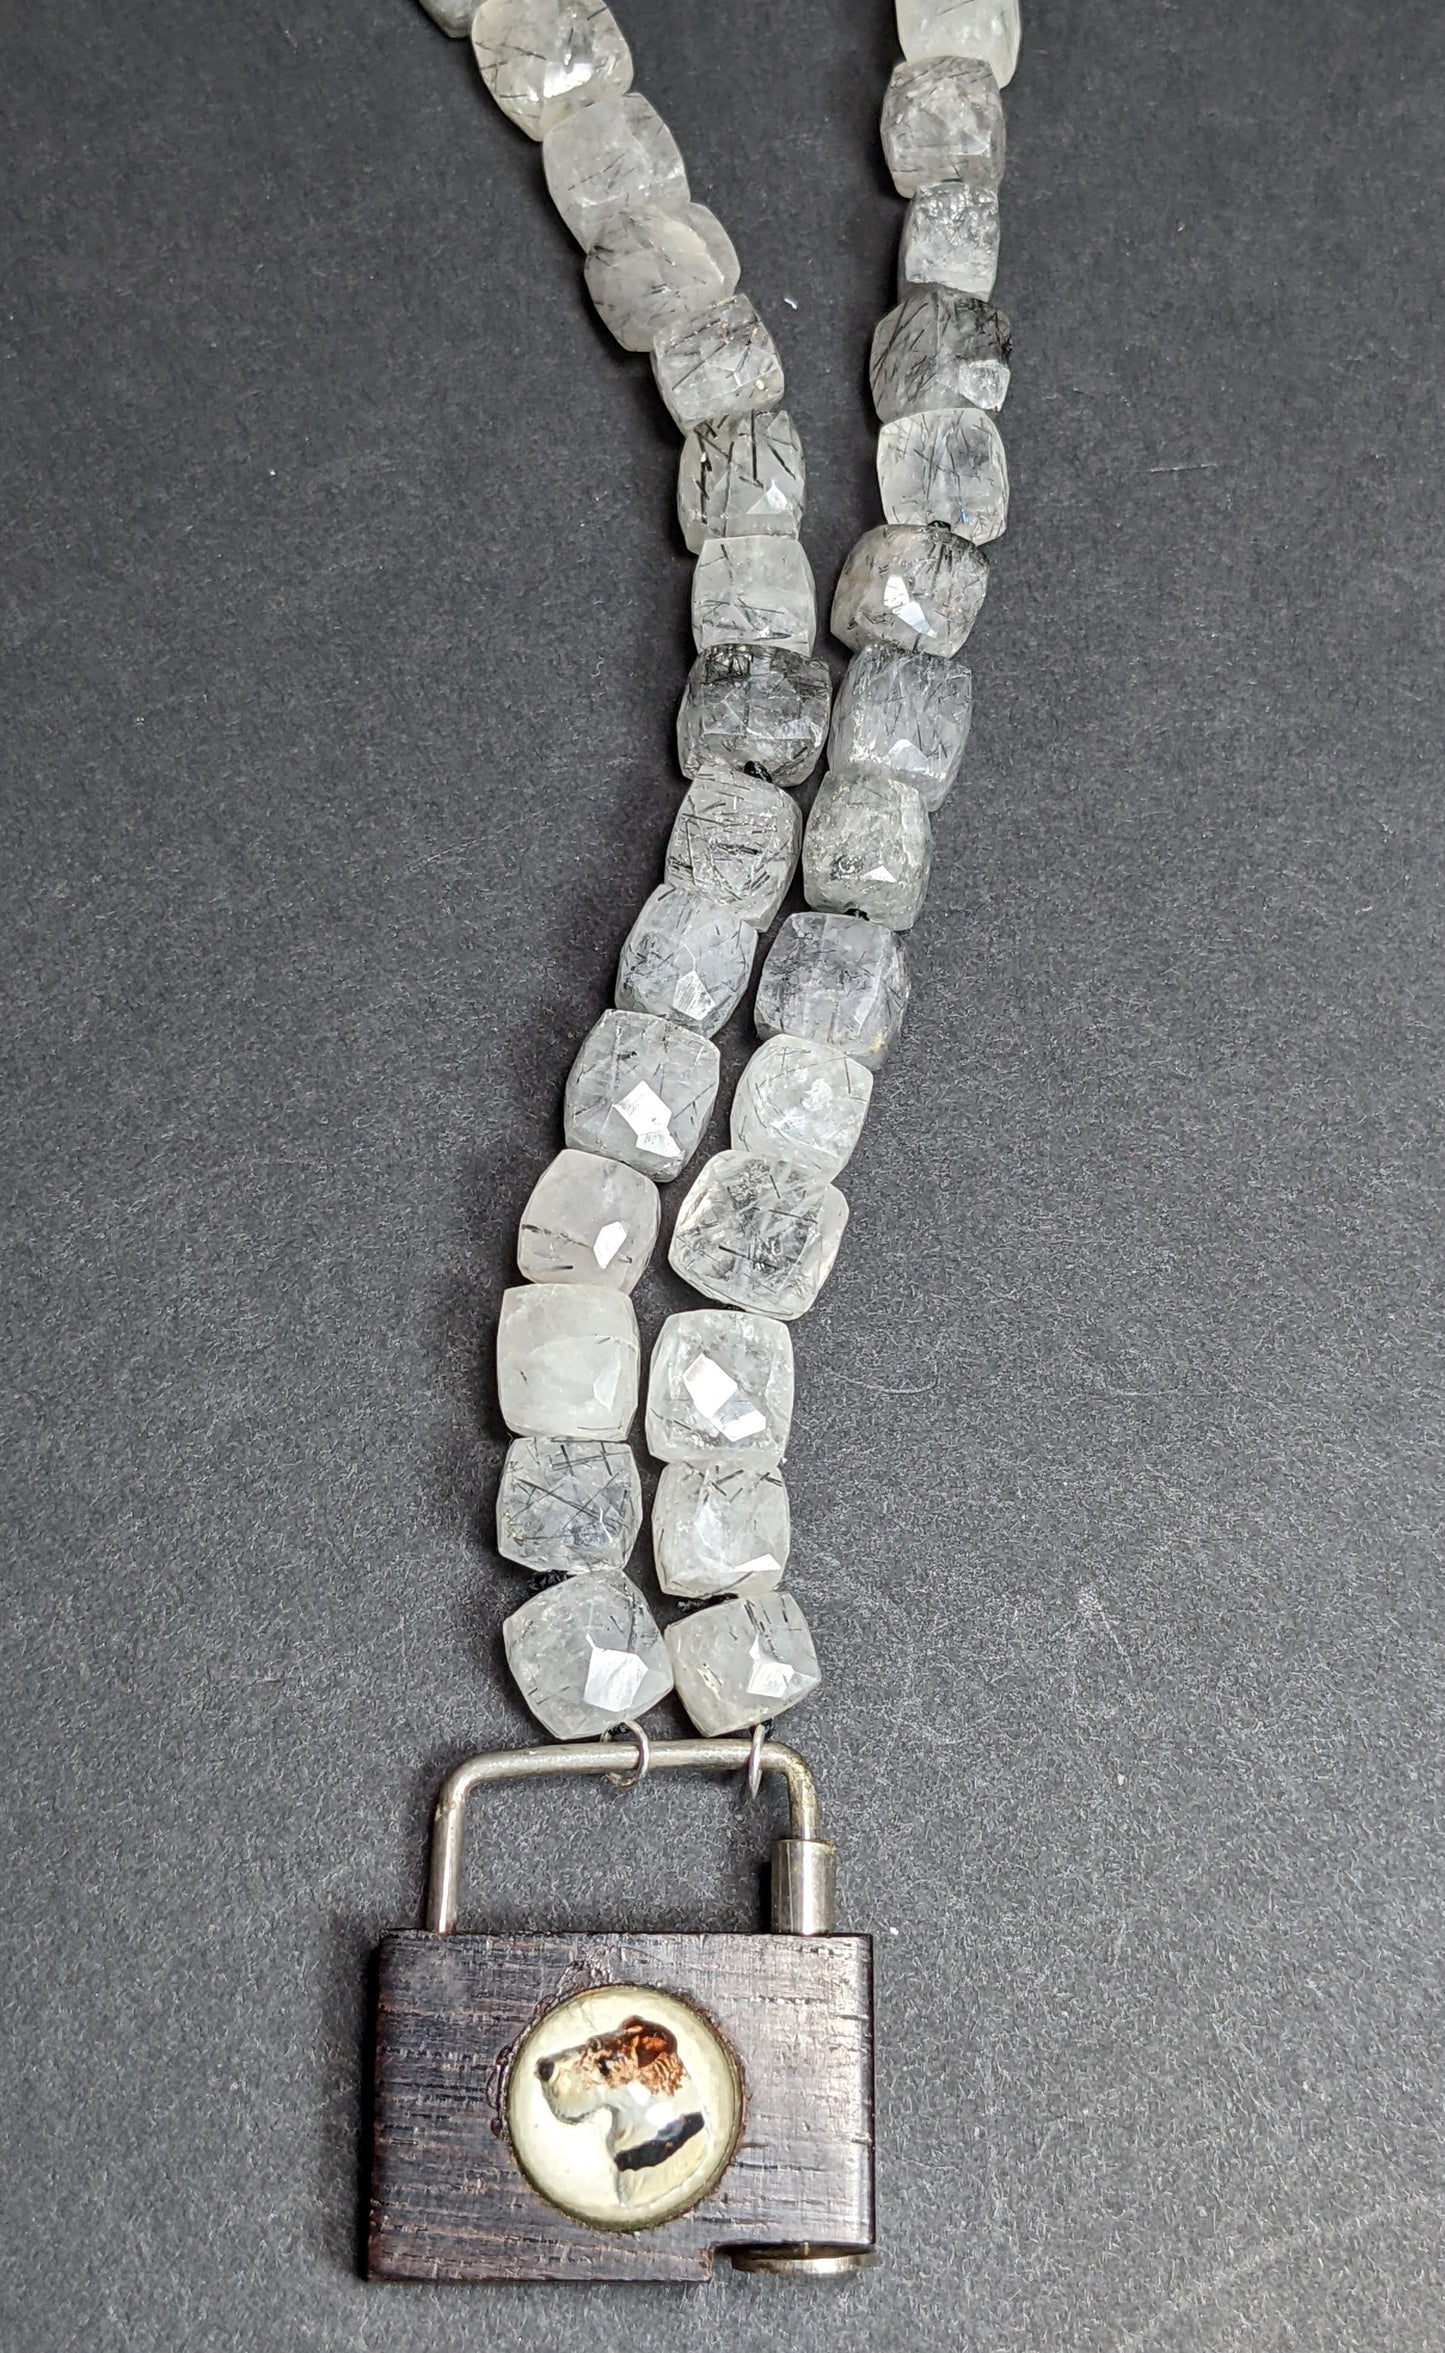 Labordorite necklace with 1930's Essex crystal clasp